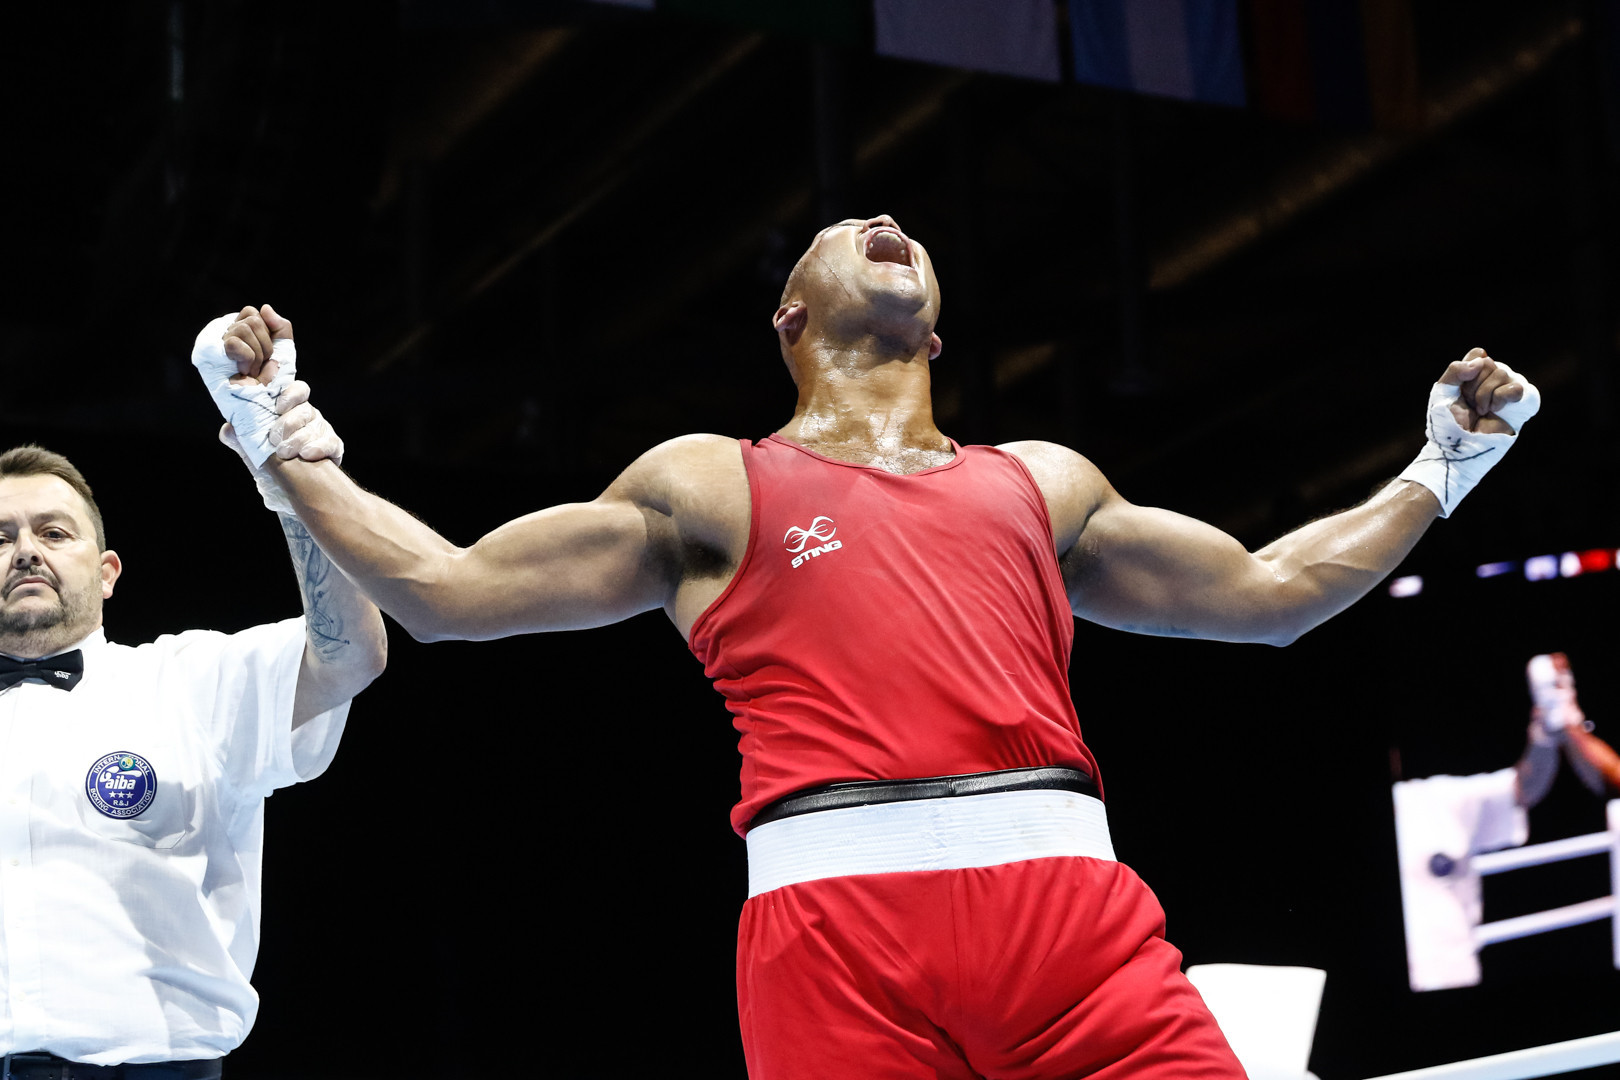 England's Commonwealth champion Frazer Clarke was booed as he narrowly defeated Russia's Maksim Babanin at the AIBA World Championships ©Yekaterinburg 2019